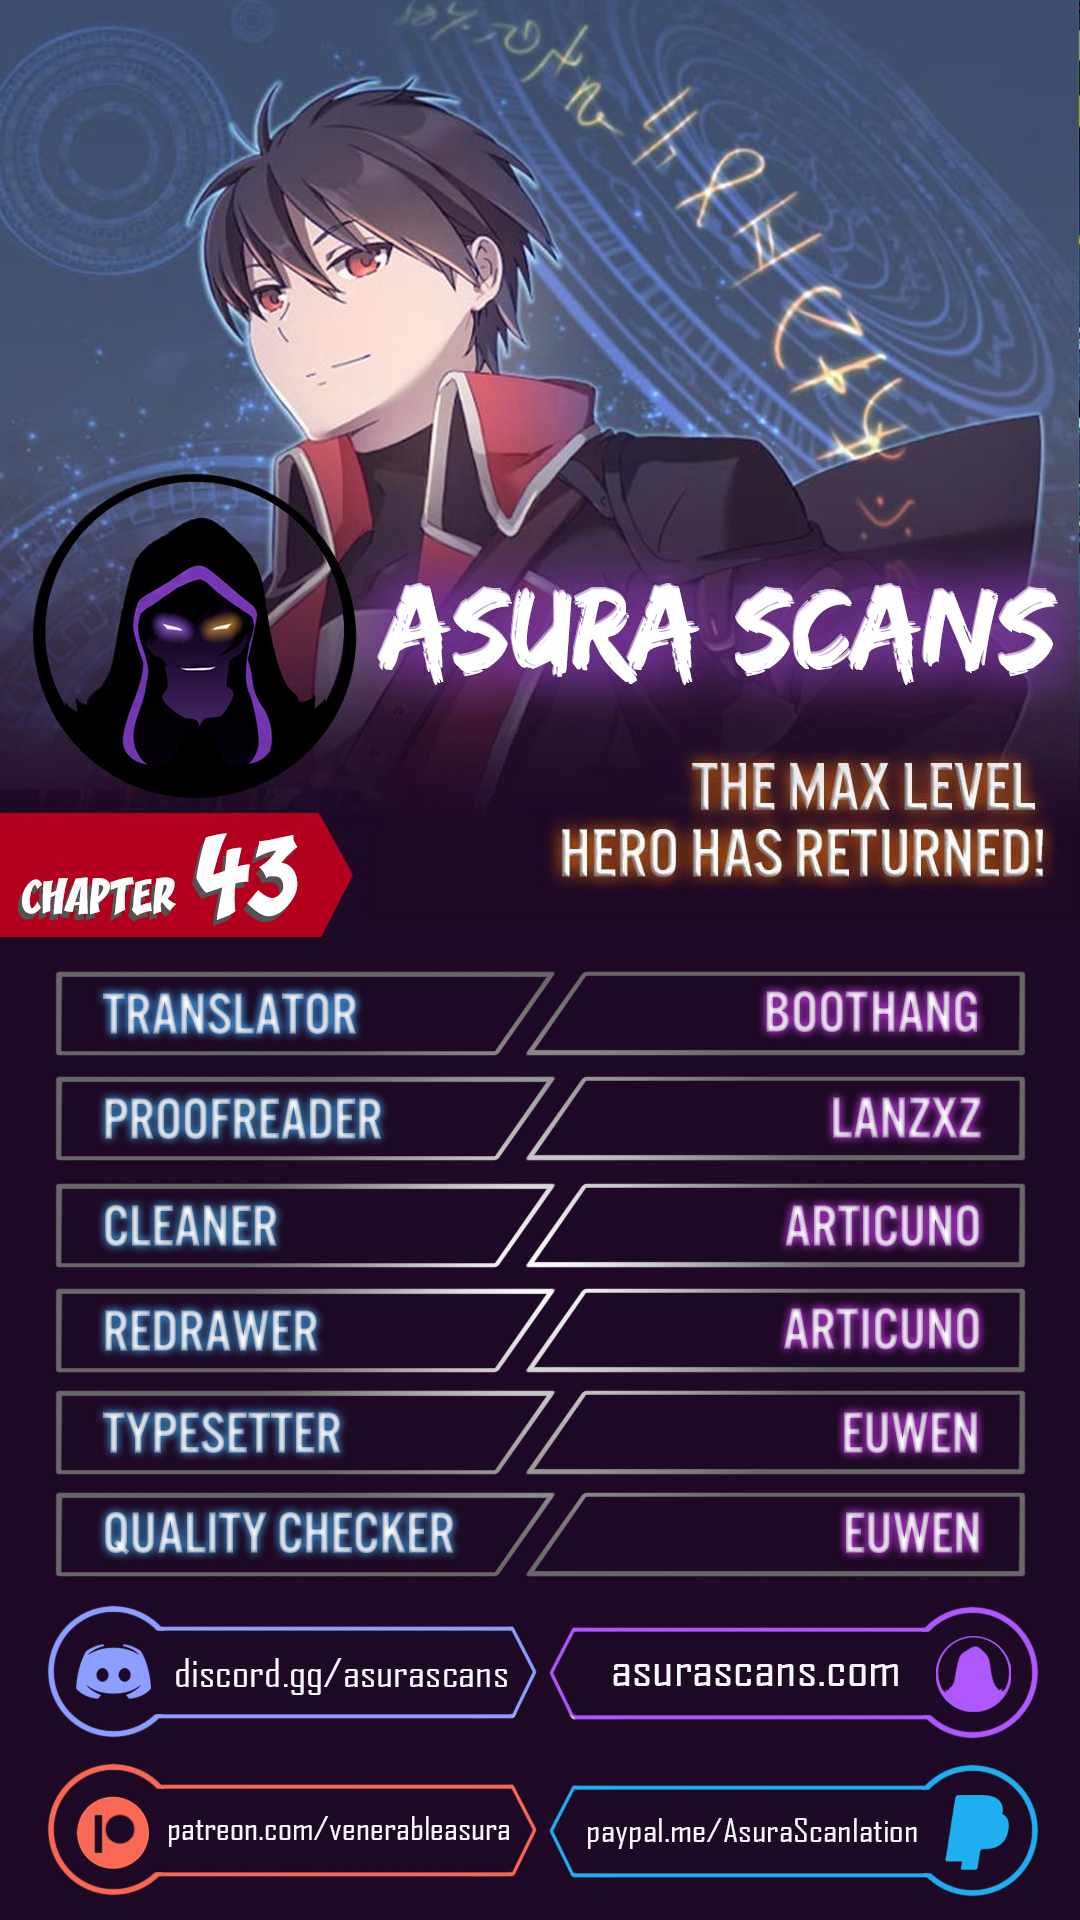 The MAX leveled hero will return! Chapter 43